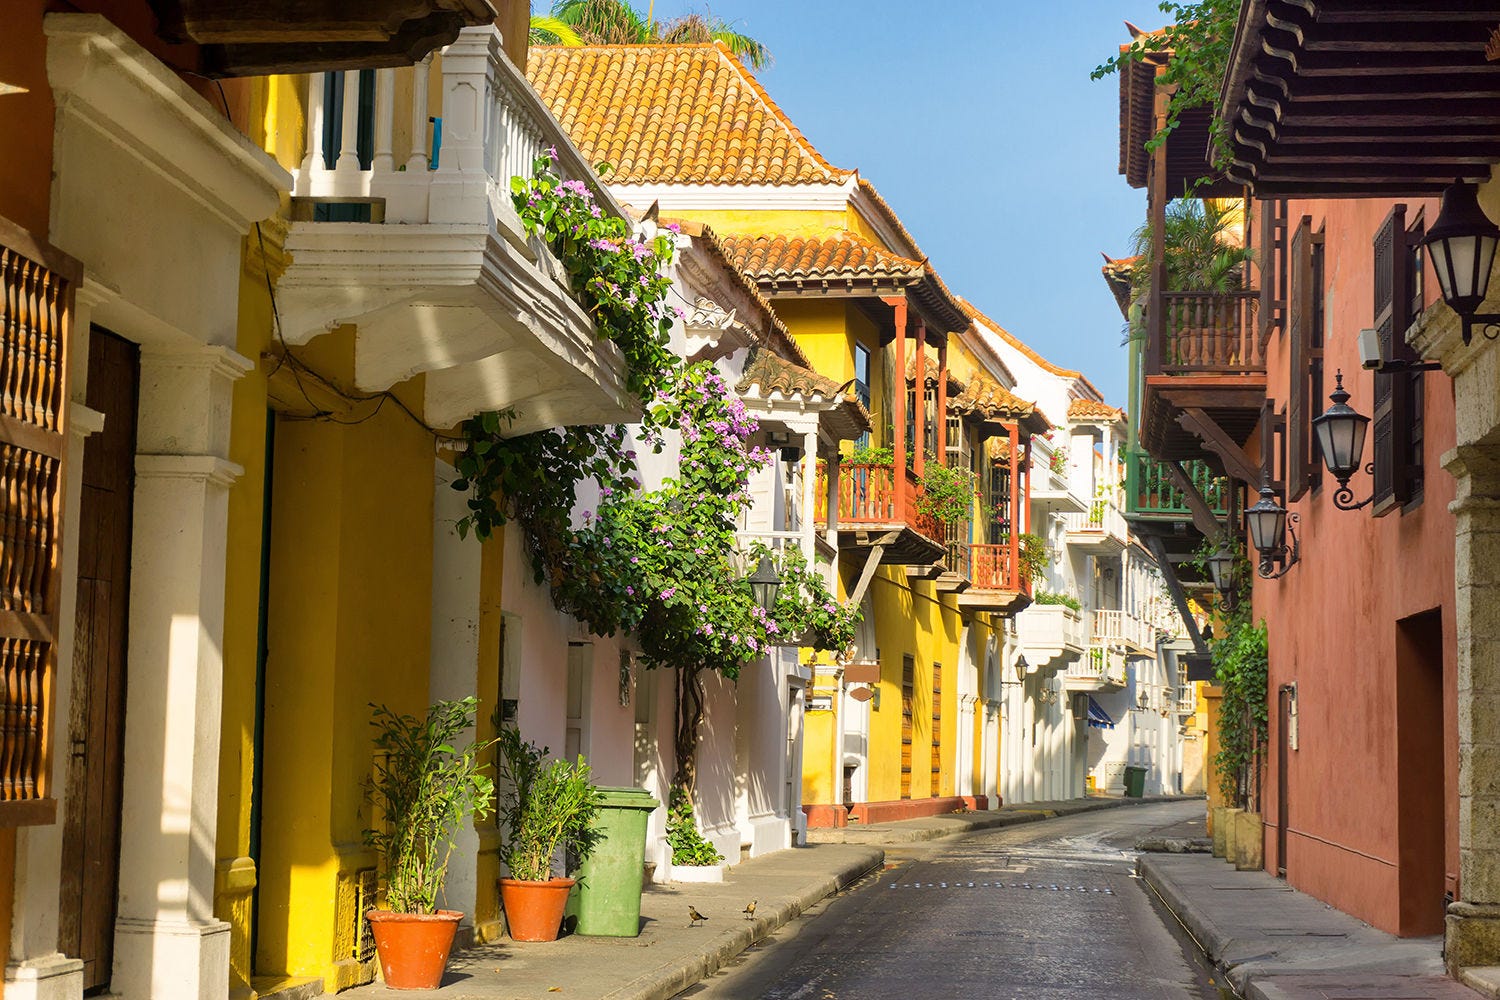 A colourful street in Colombia